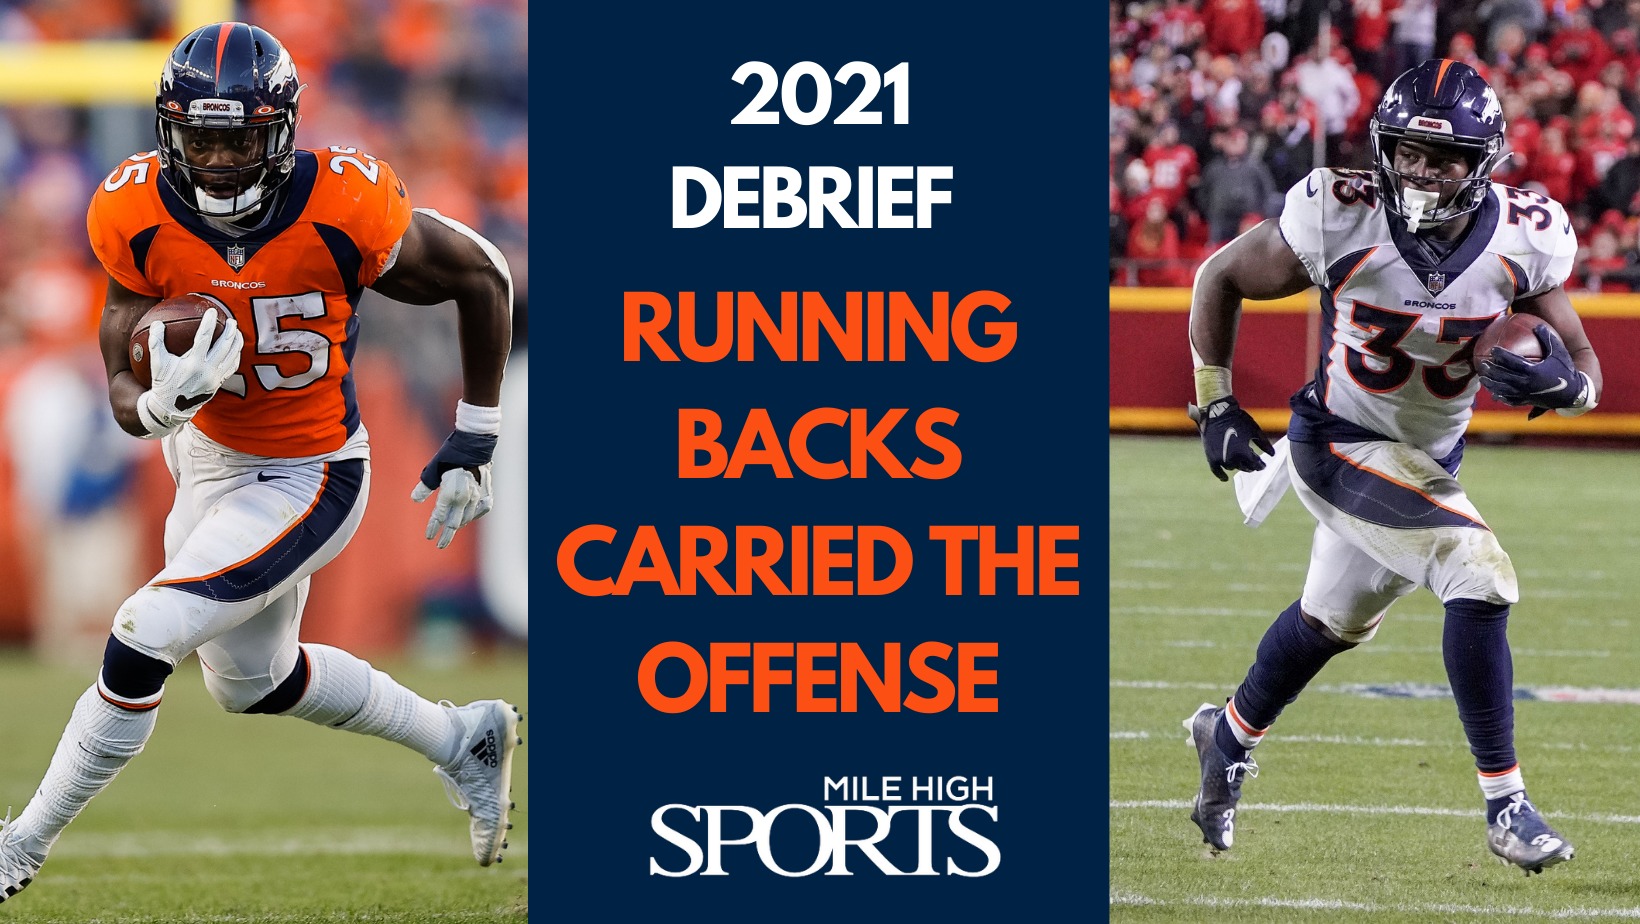 2021 Broncos debrief Running backs carried the offense